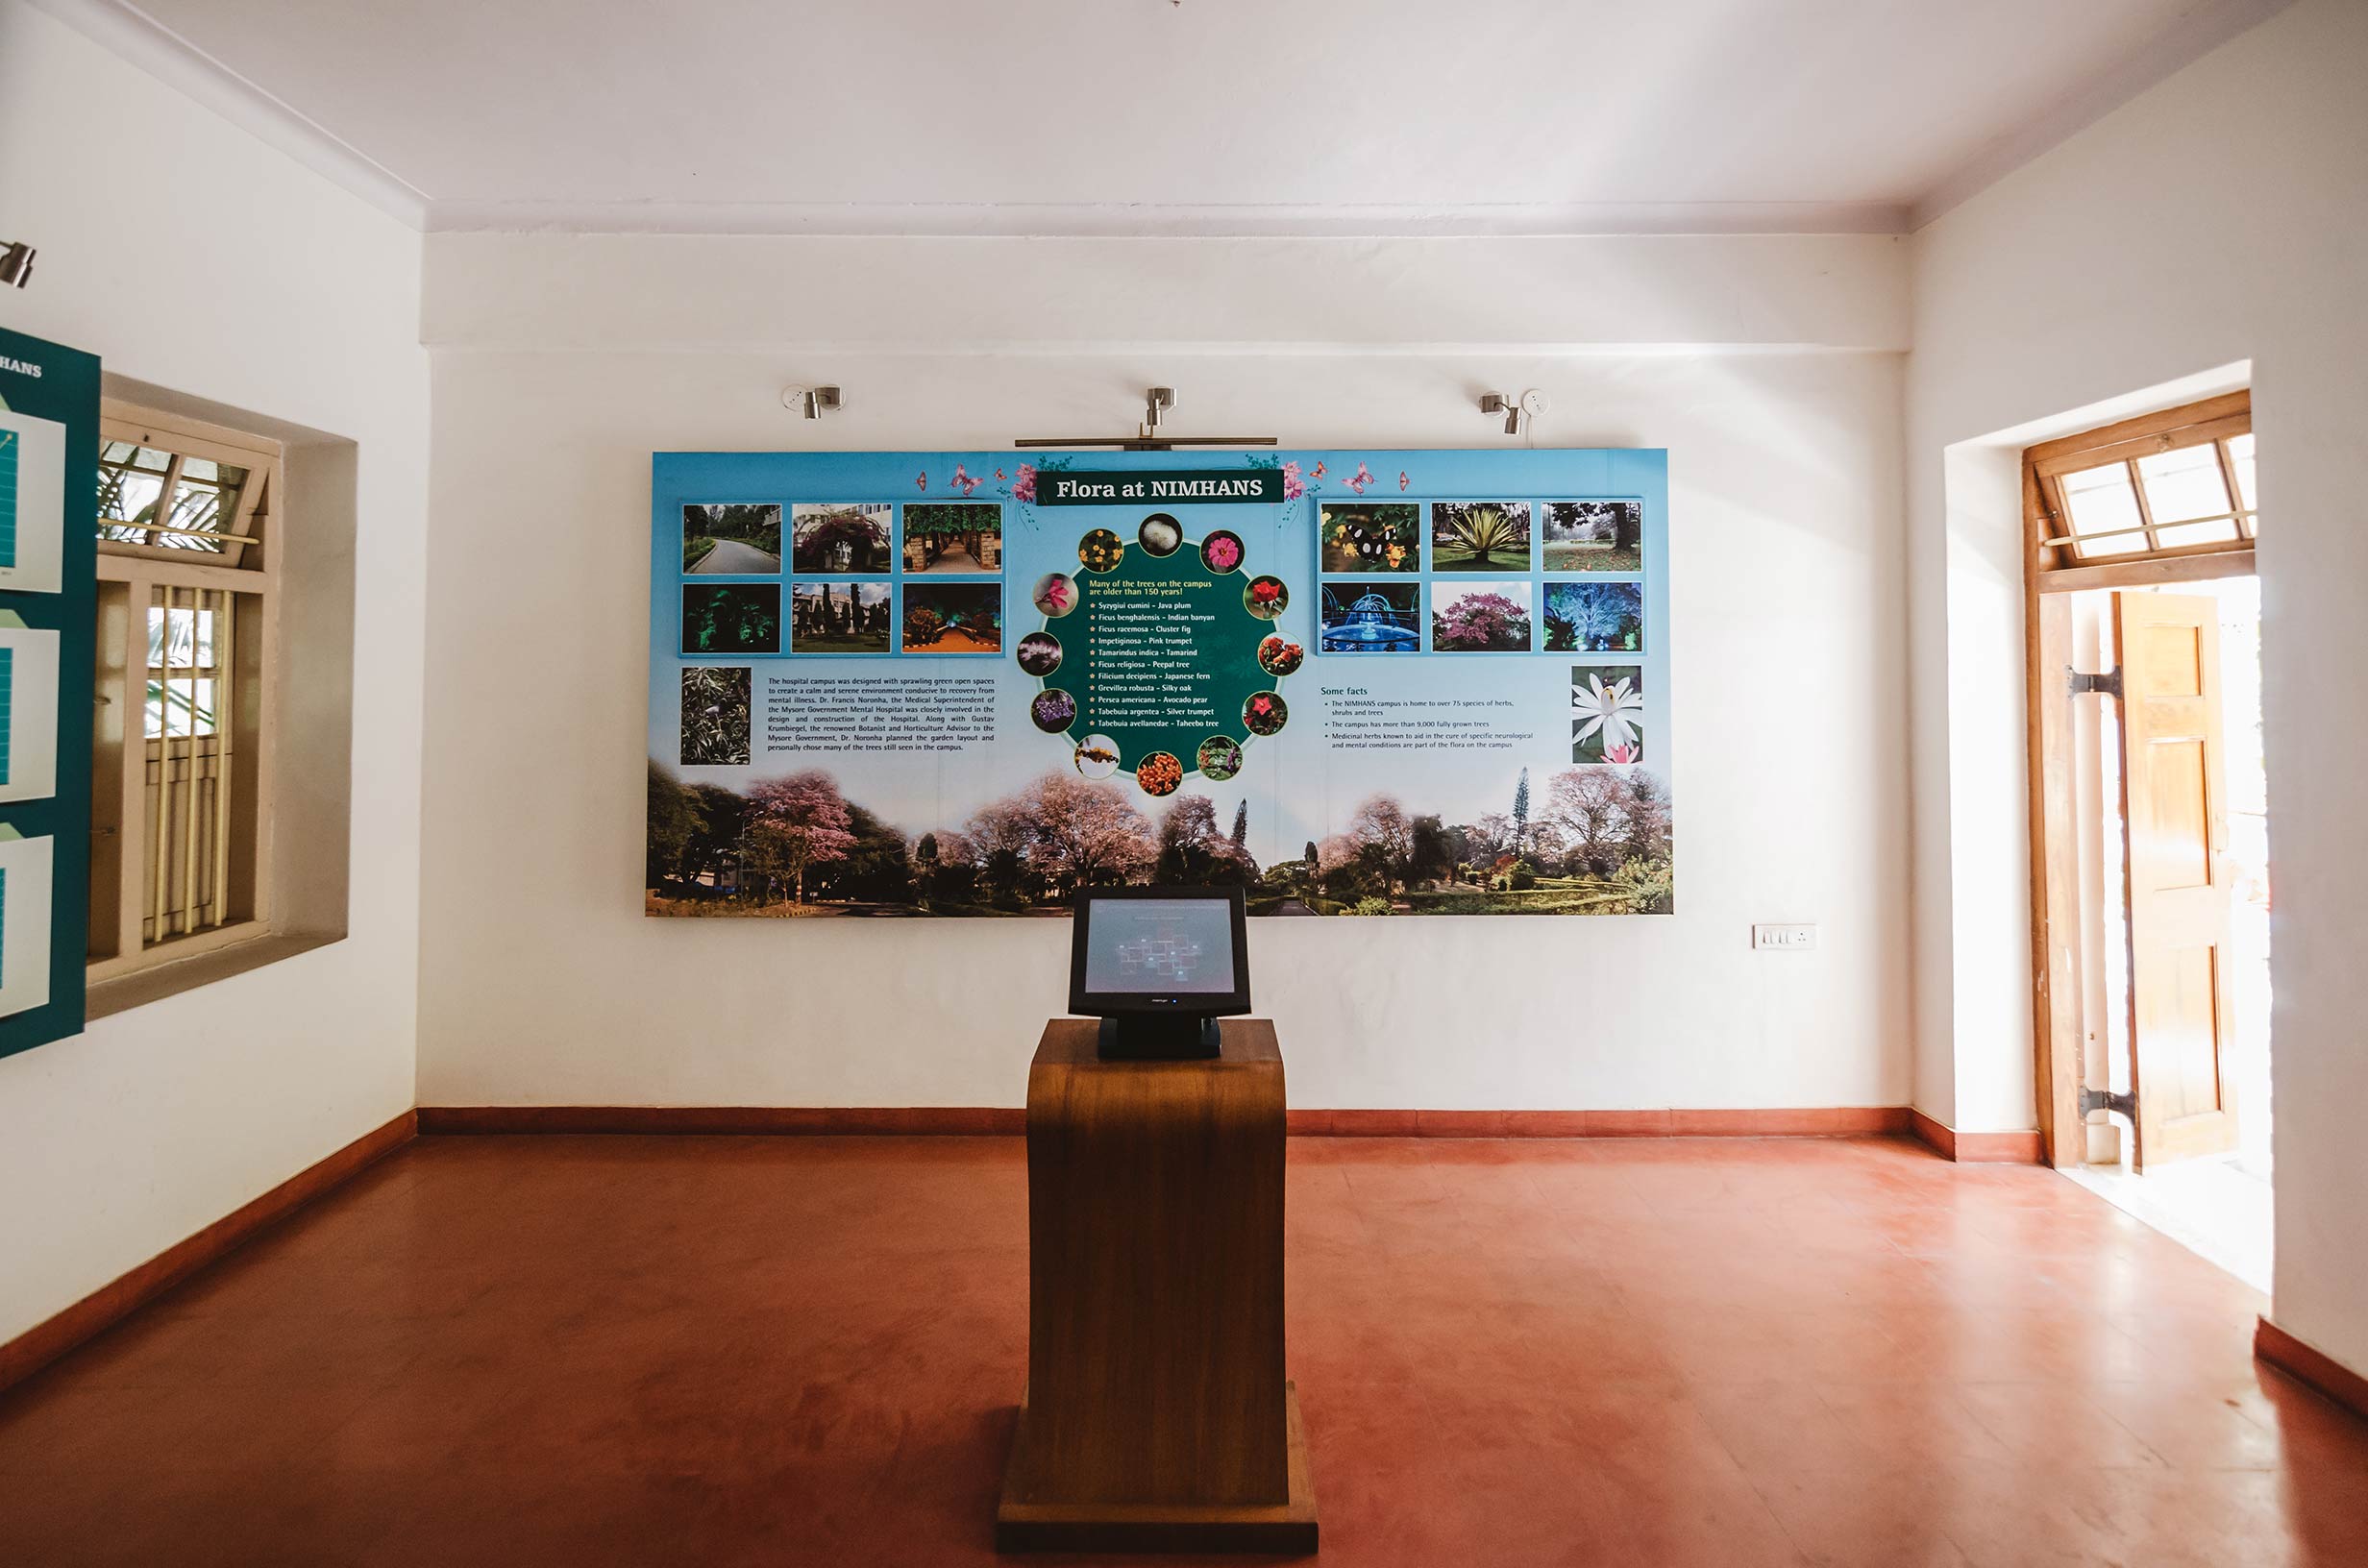 Display showing the flora at NIMHANS institute